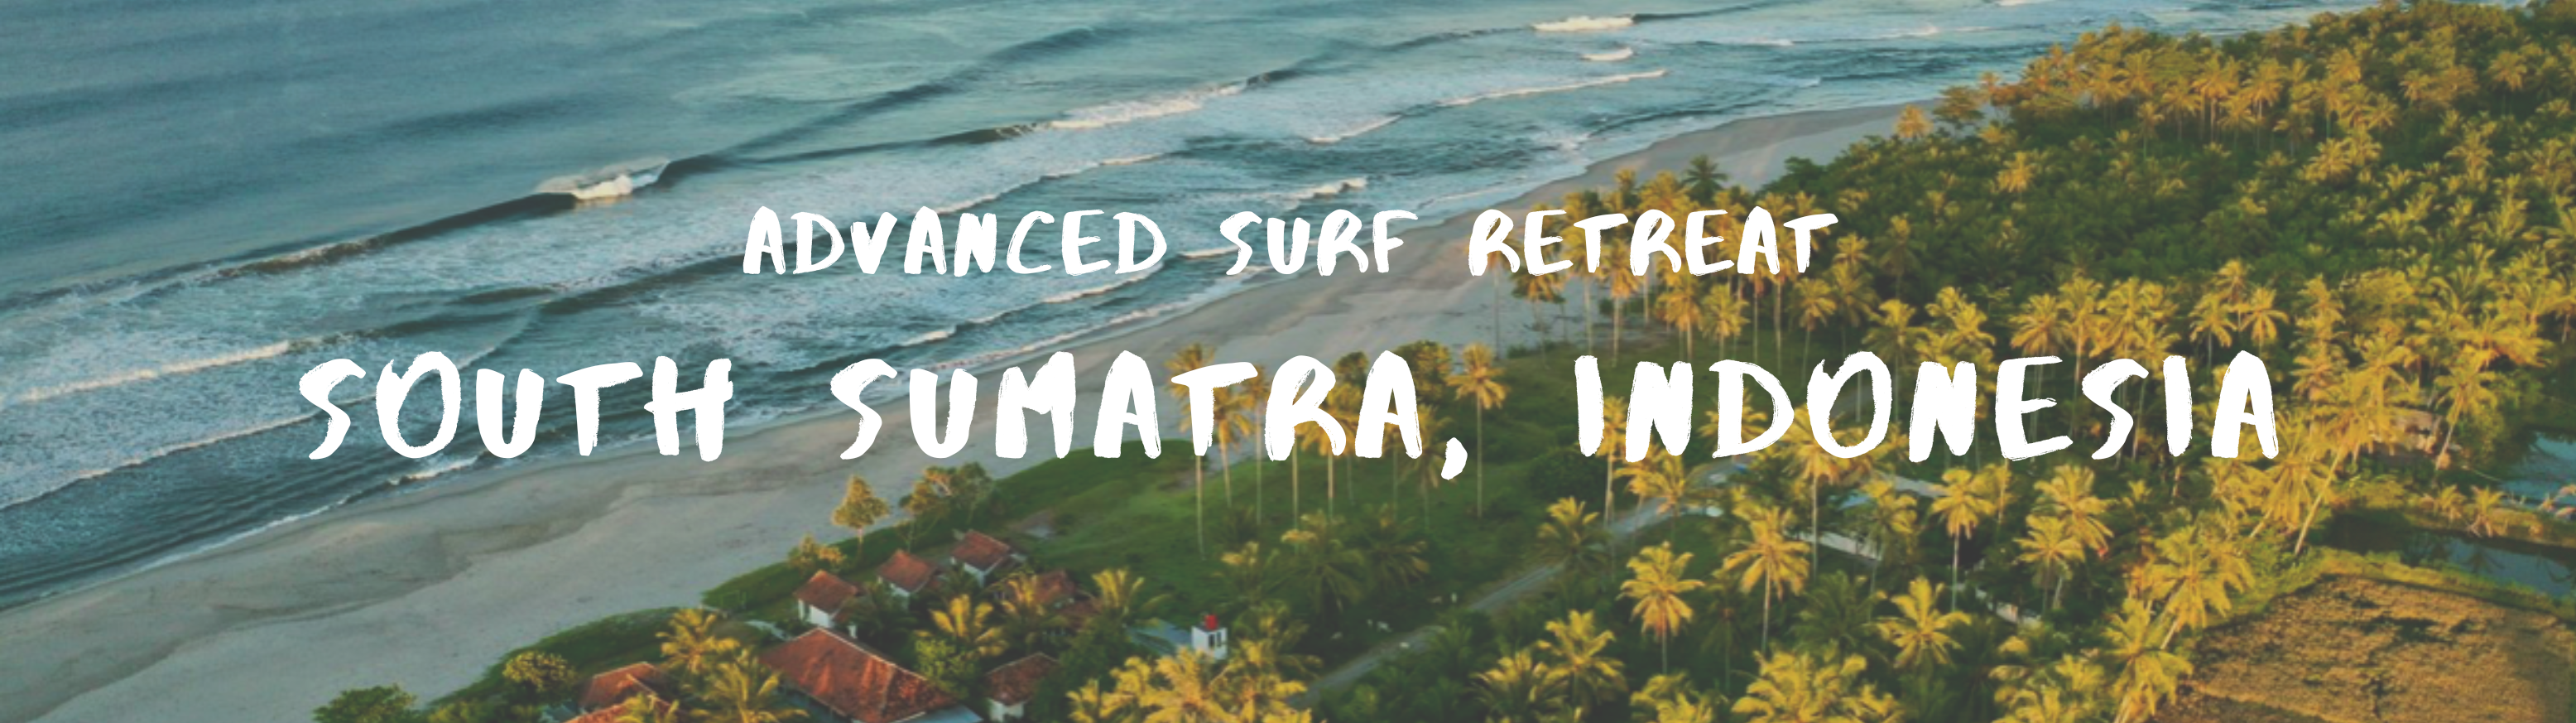 surf with amigas Indonesia retreat